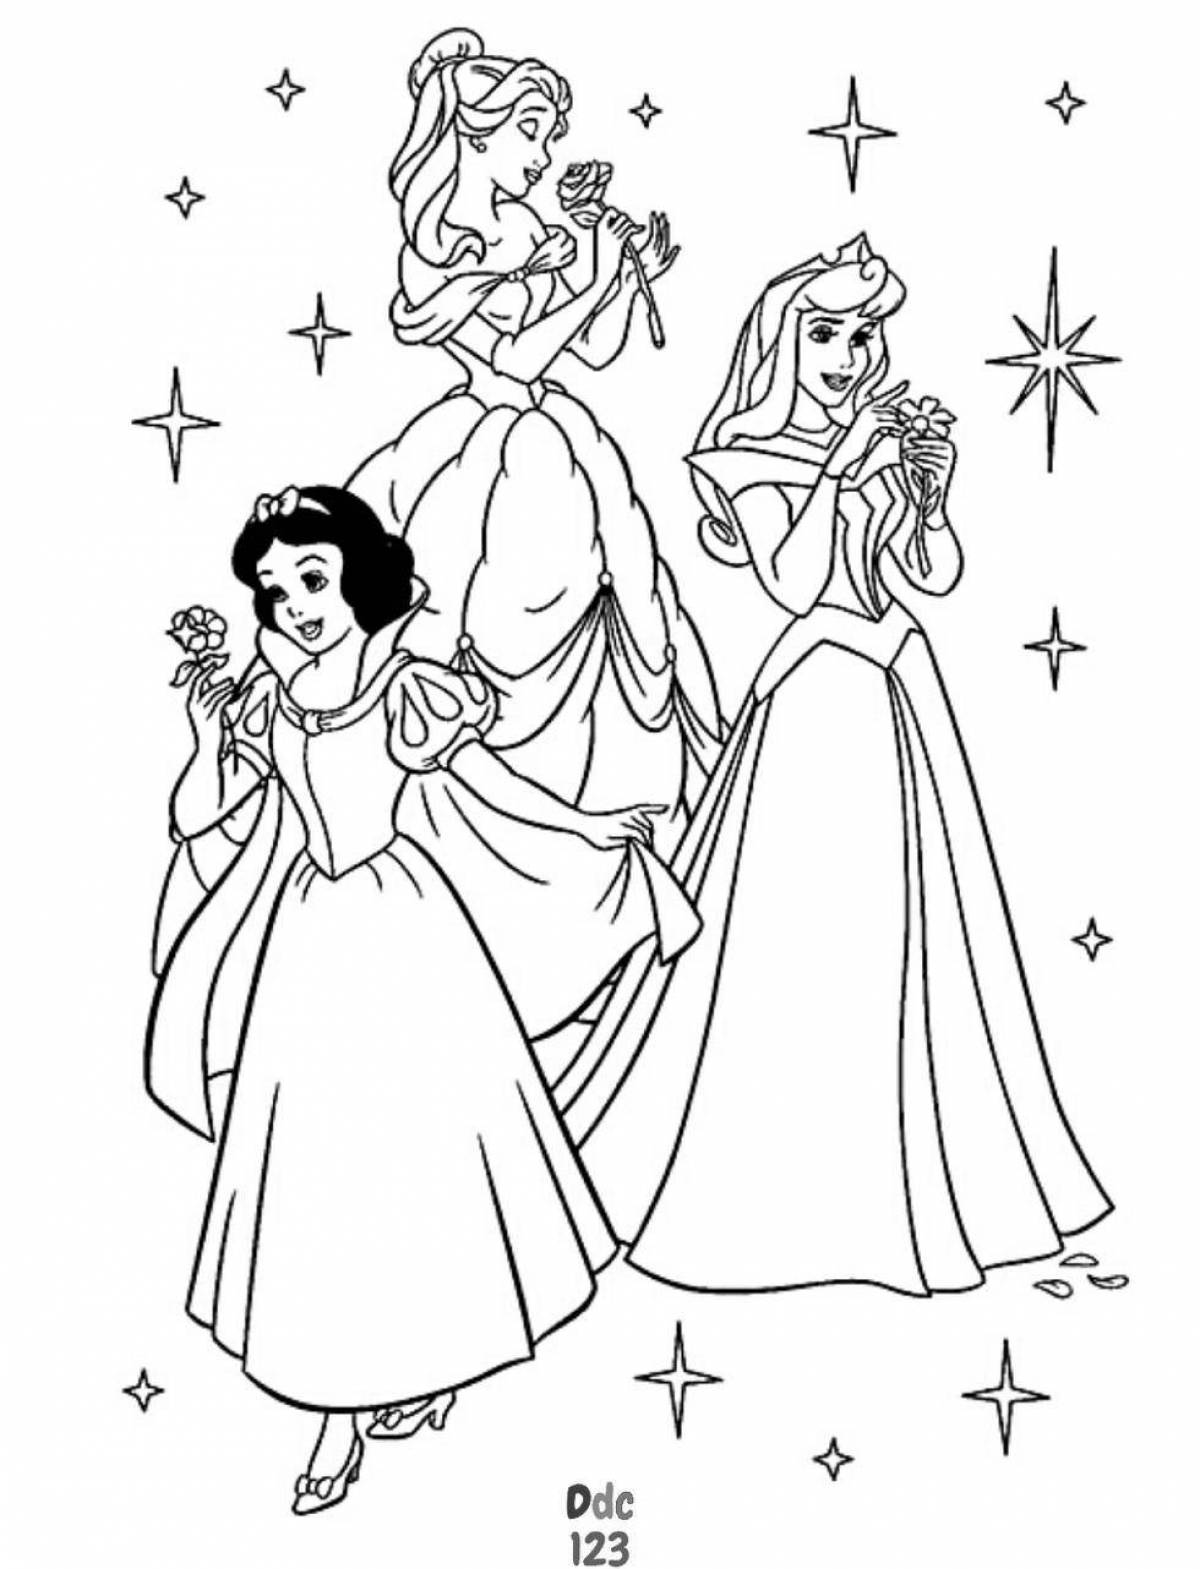 Charming princess coloring pictures